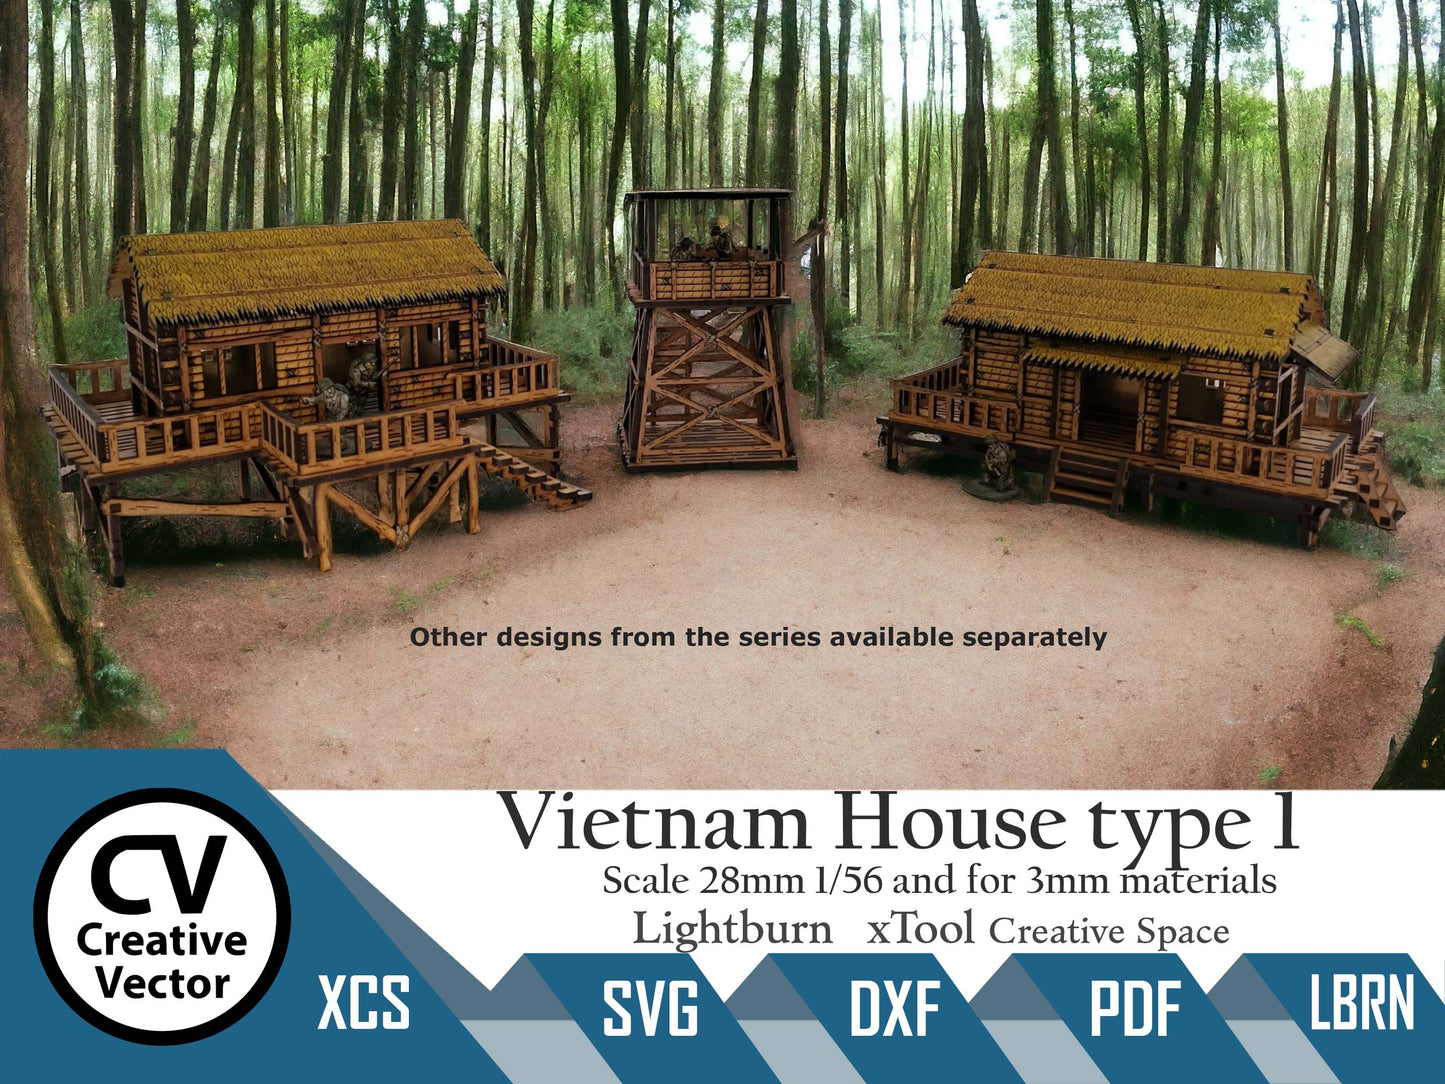 Vietnam House type 1 in scale 28 mm